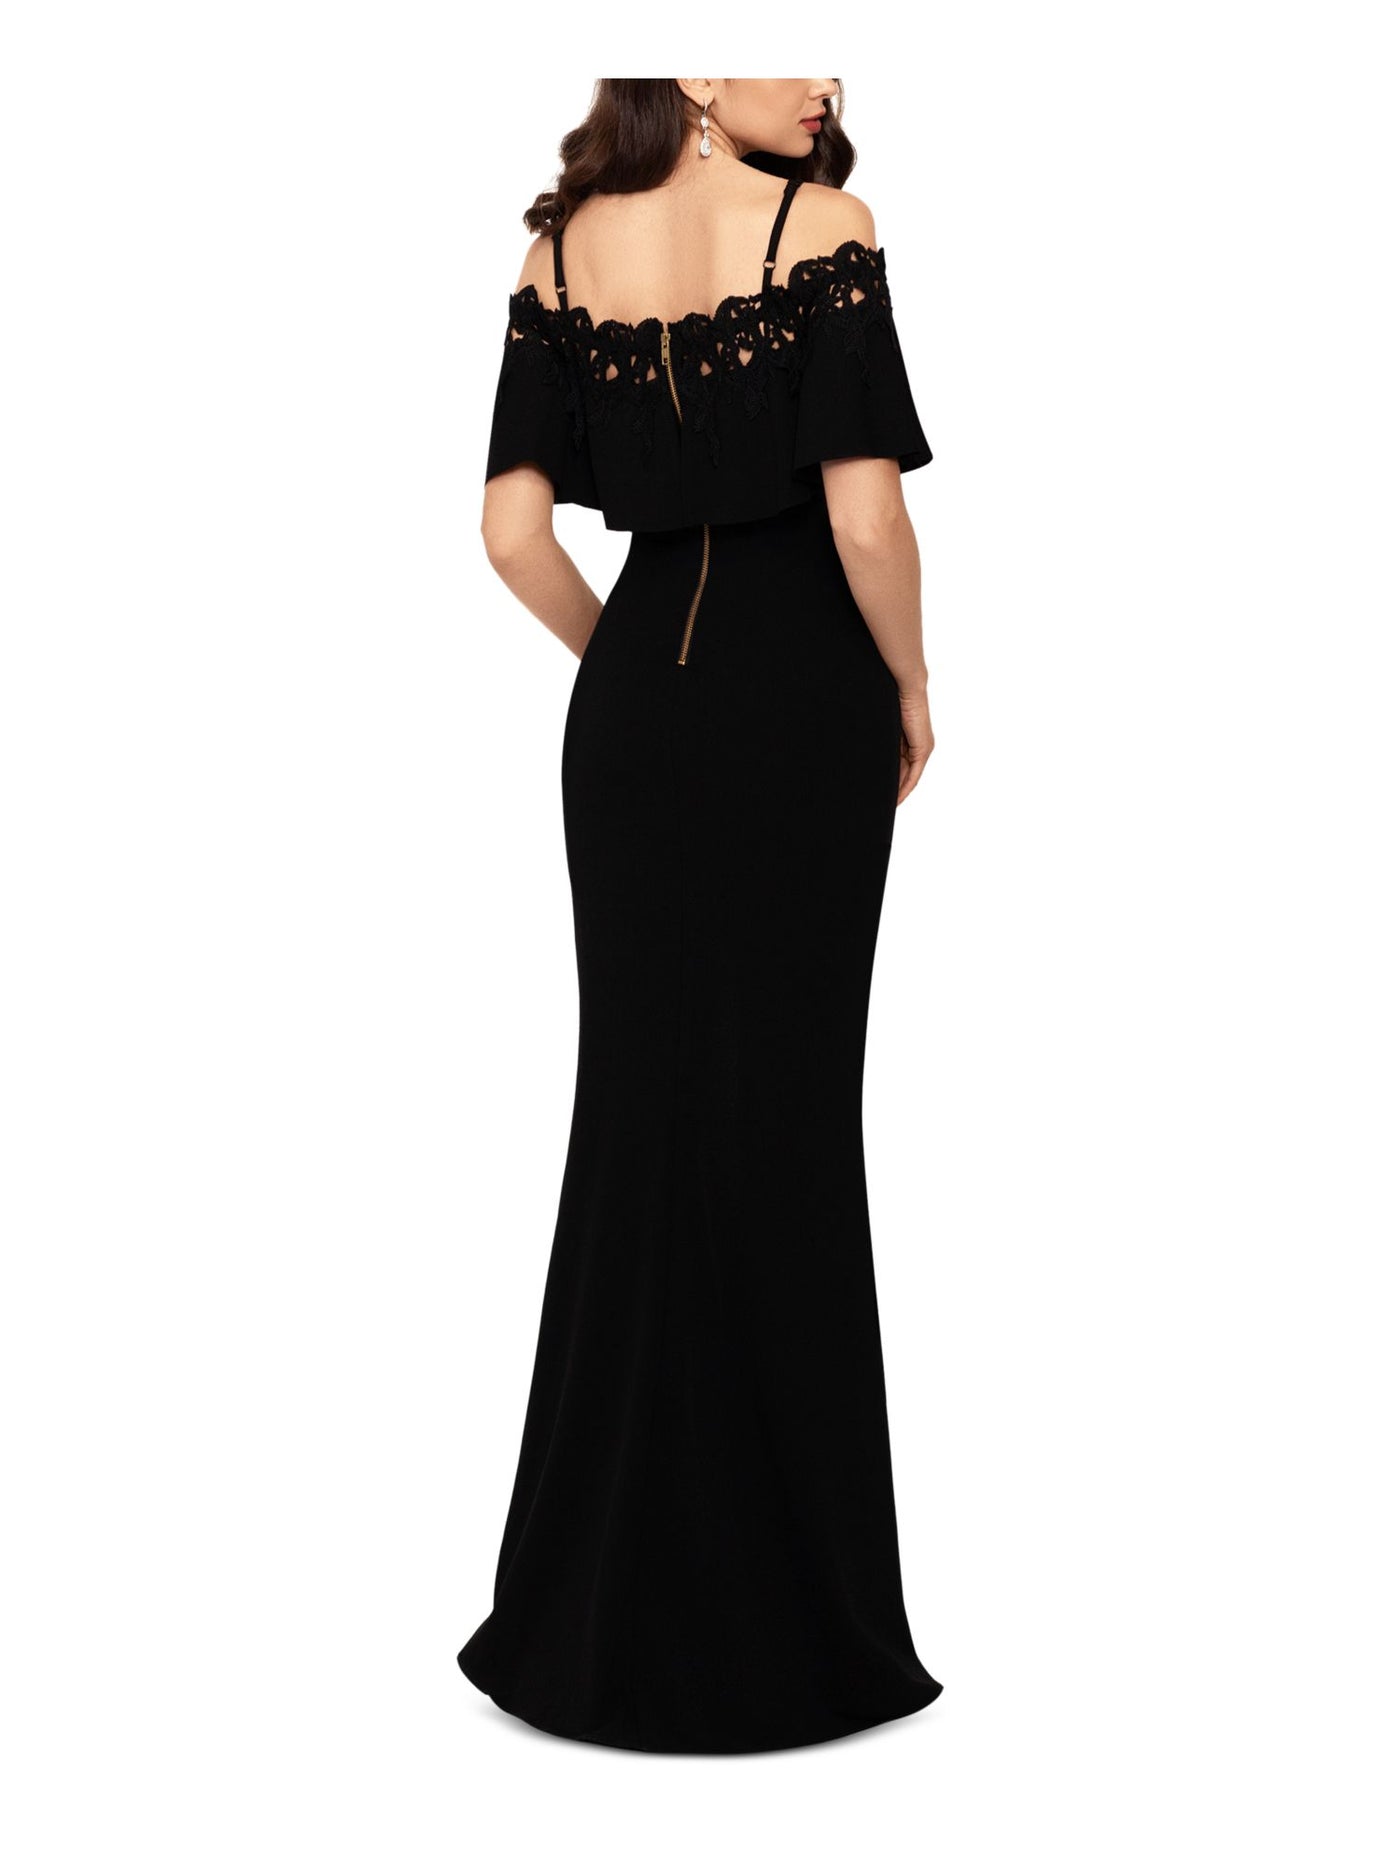 BETSY & ADAM Womens Black Slitted Lace Trim Off Shoulder Full-Length Evening Dress 6